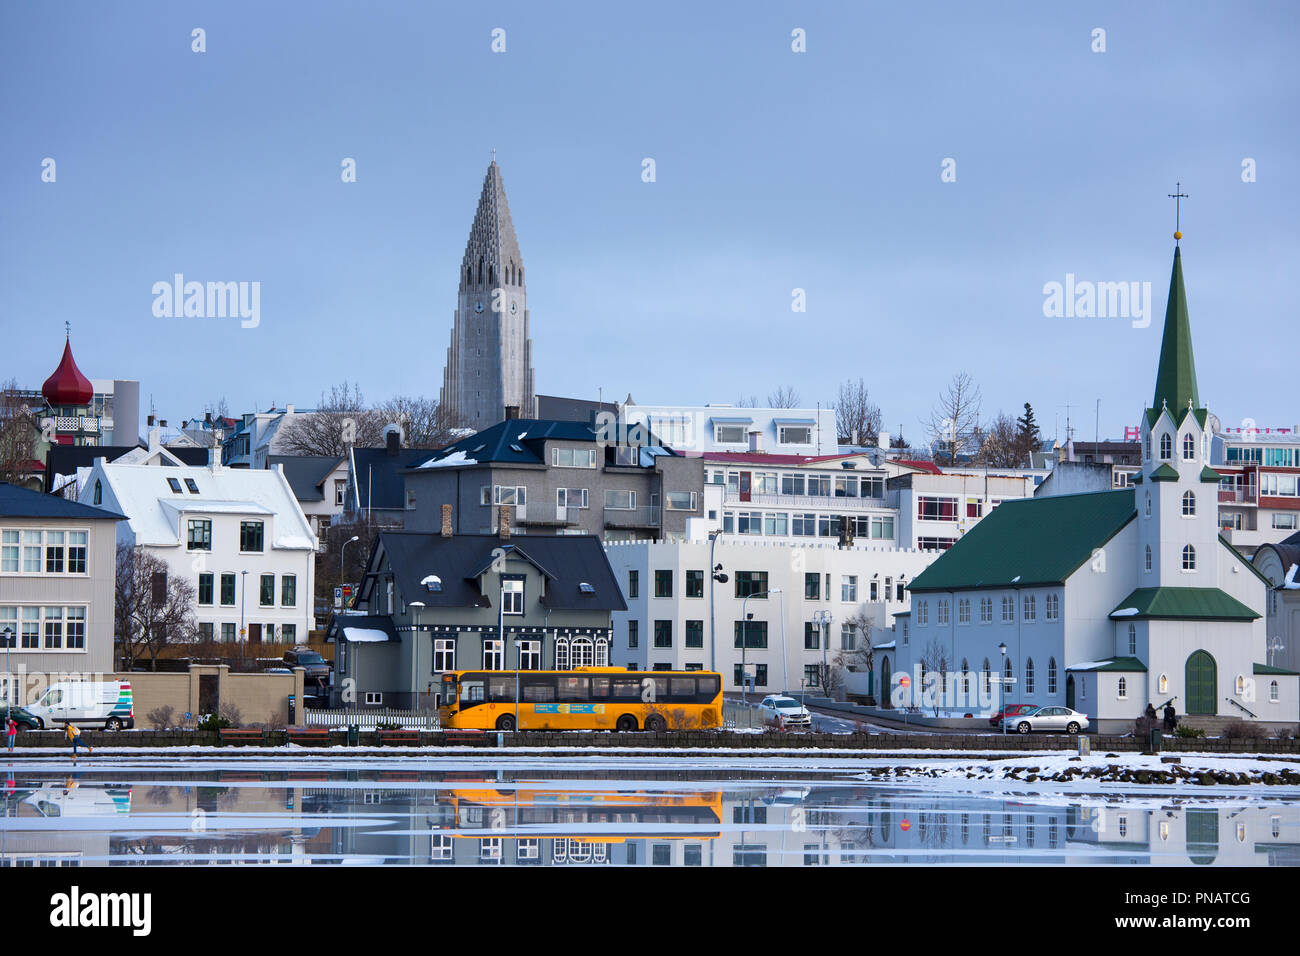 Yellow bus - coach - in the capital city of Reykjavik and Lutheran church Hallgr’mskirkja Cathedral, Iceland Stock Photo